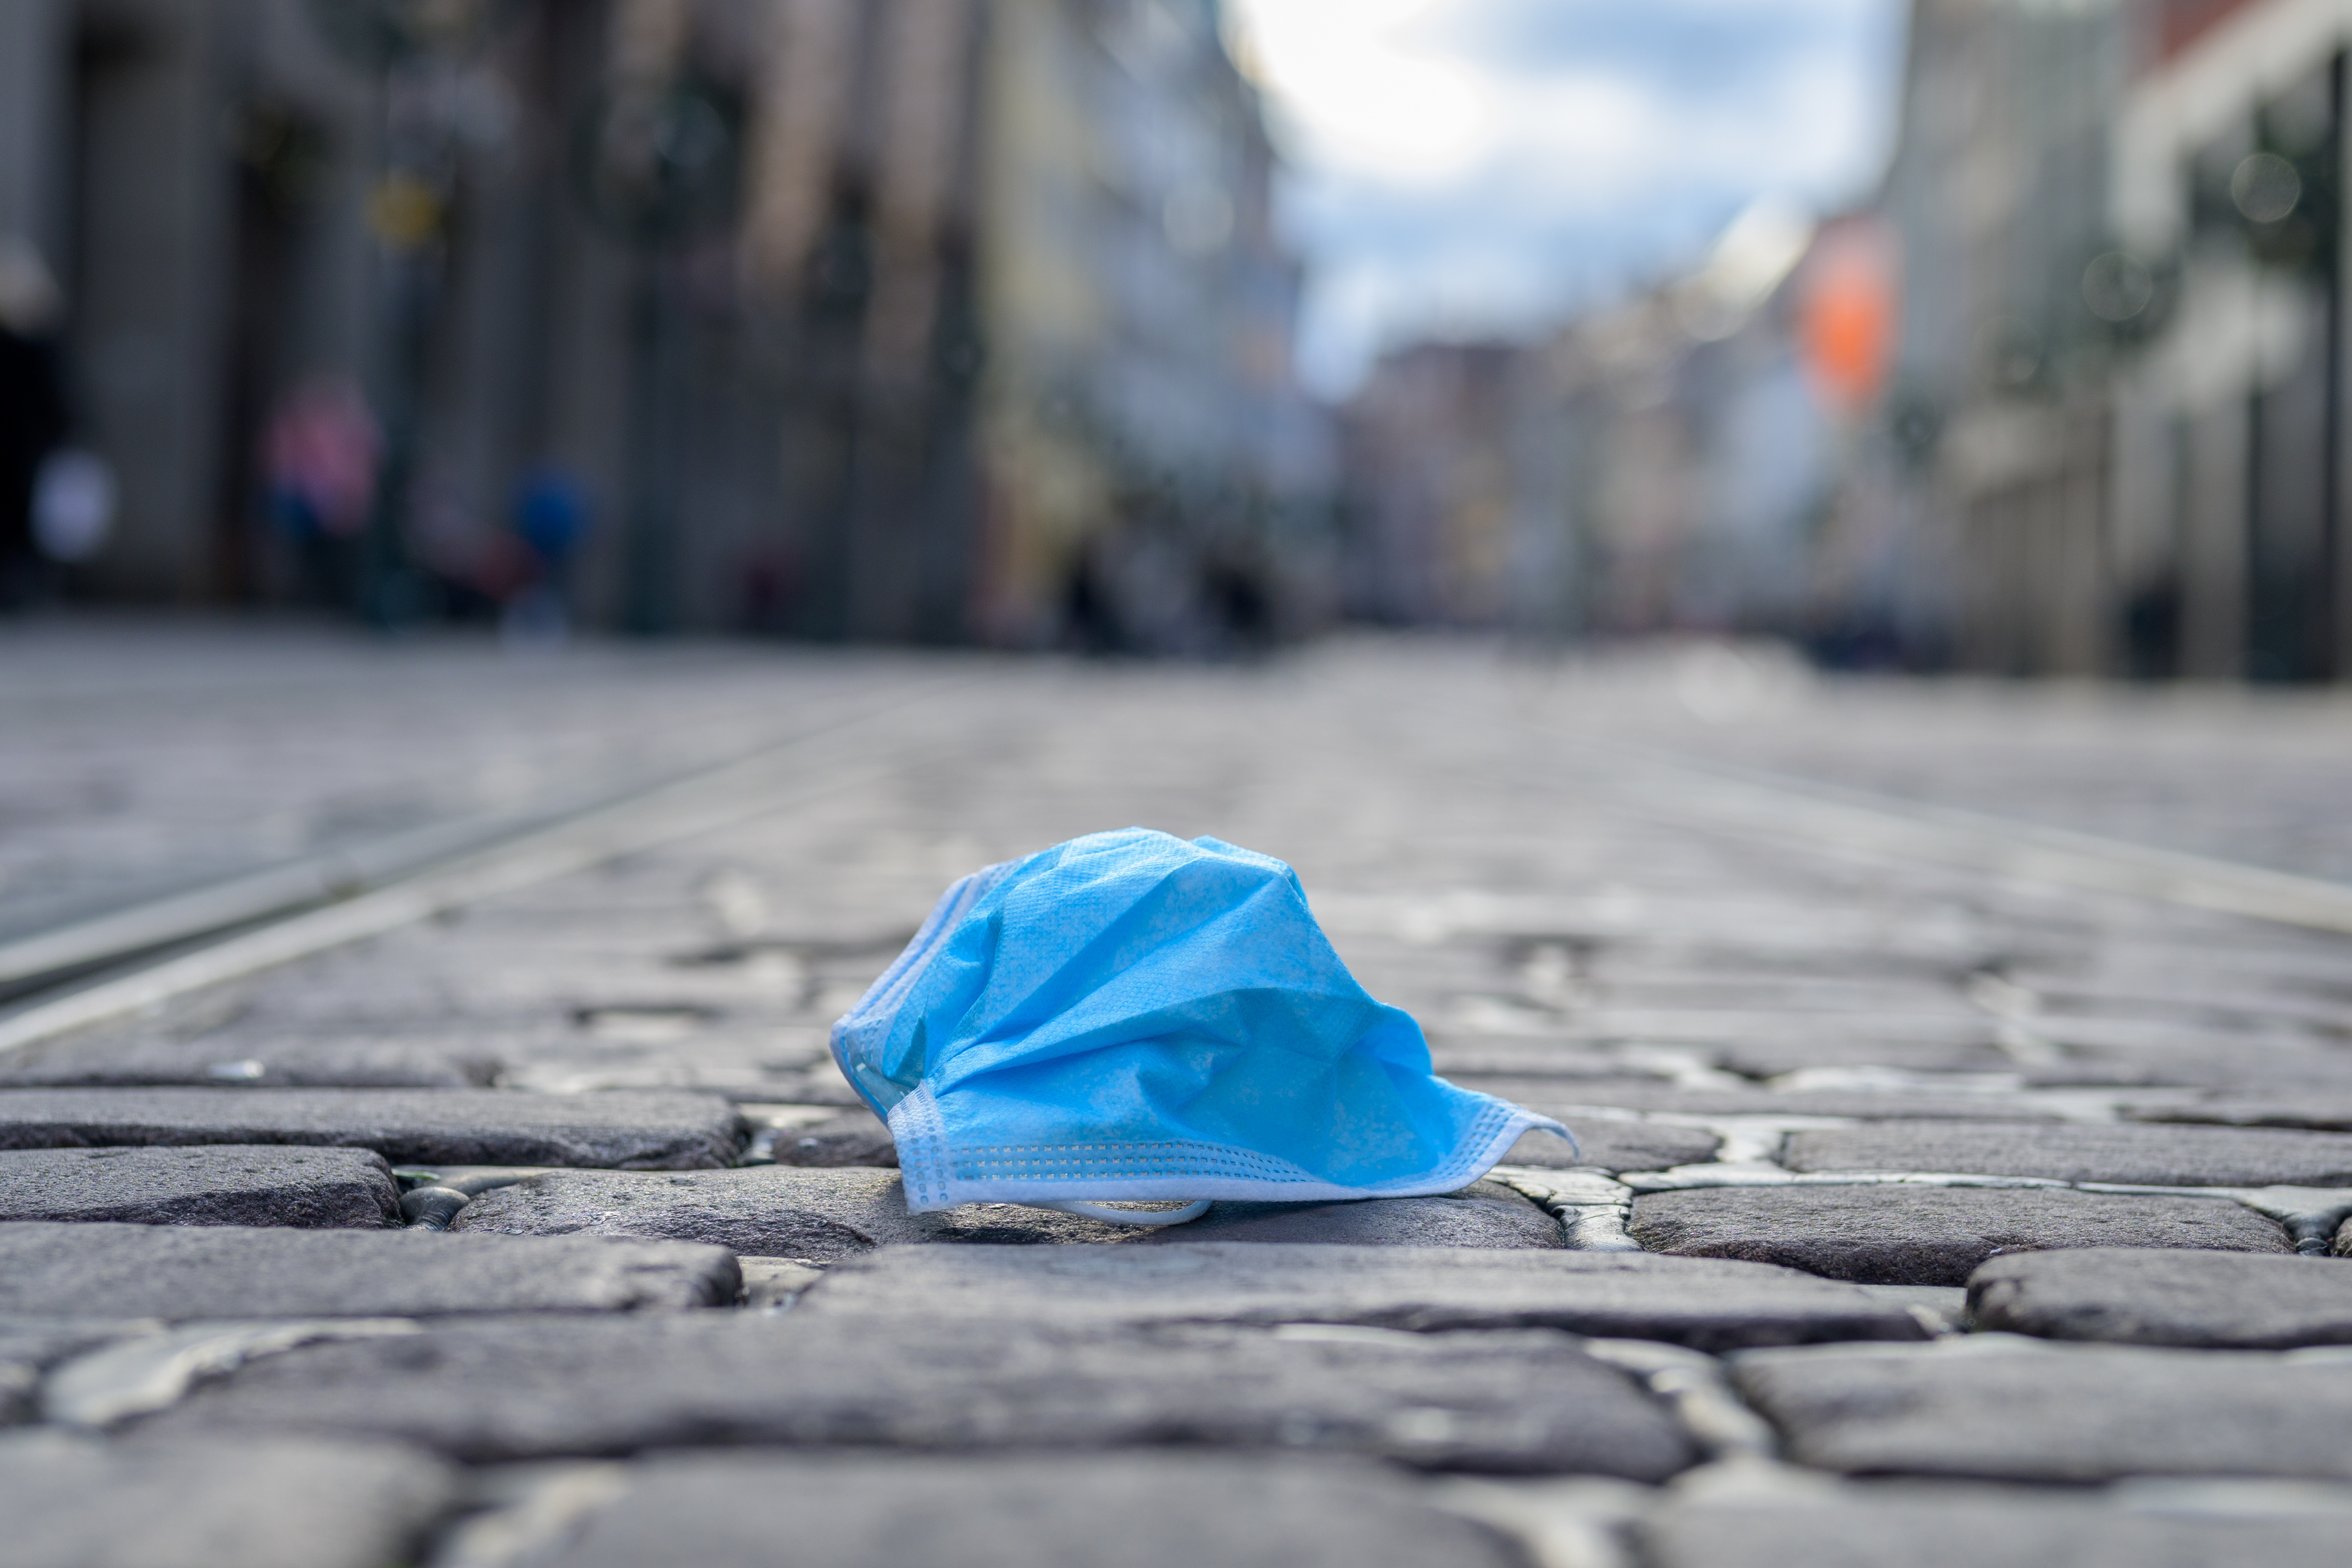 Discarded face mask lying in an urban street during the Covid-19 pandemic, in a low angle view with urban buildings